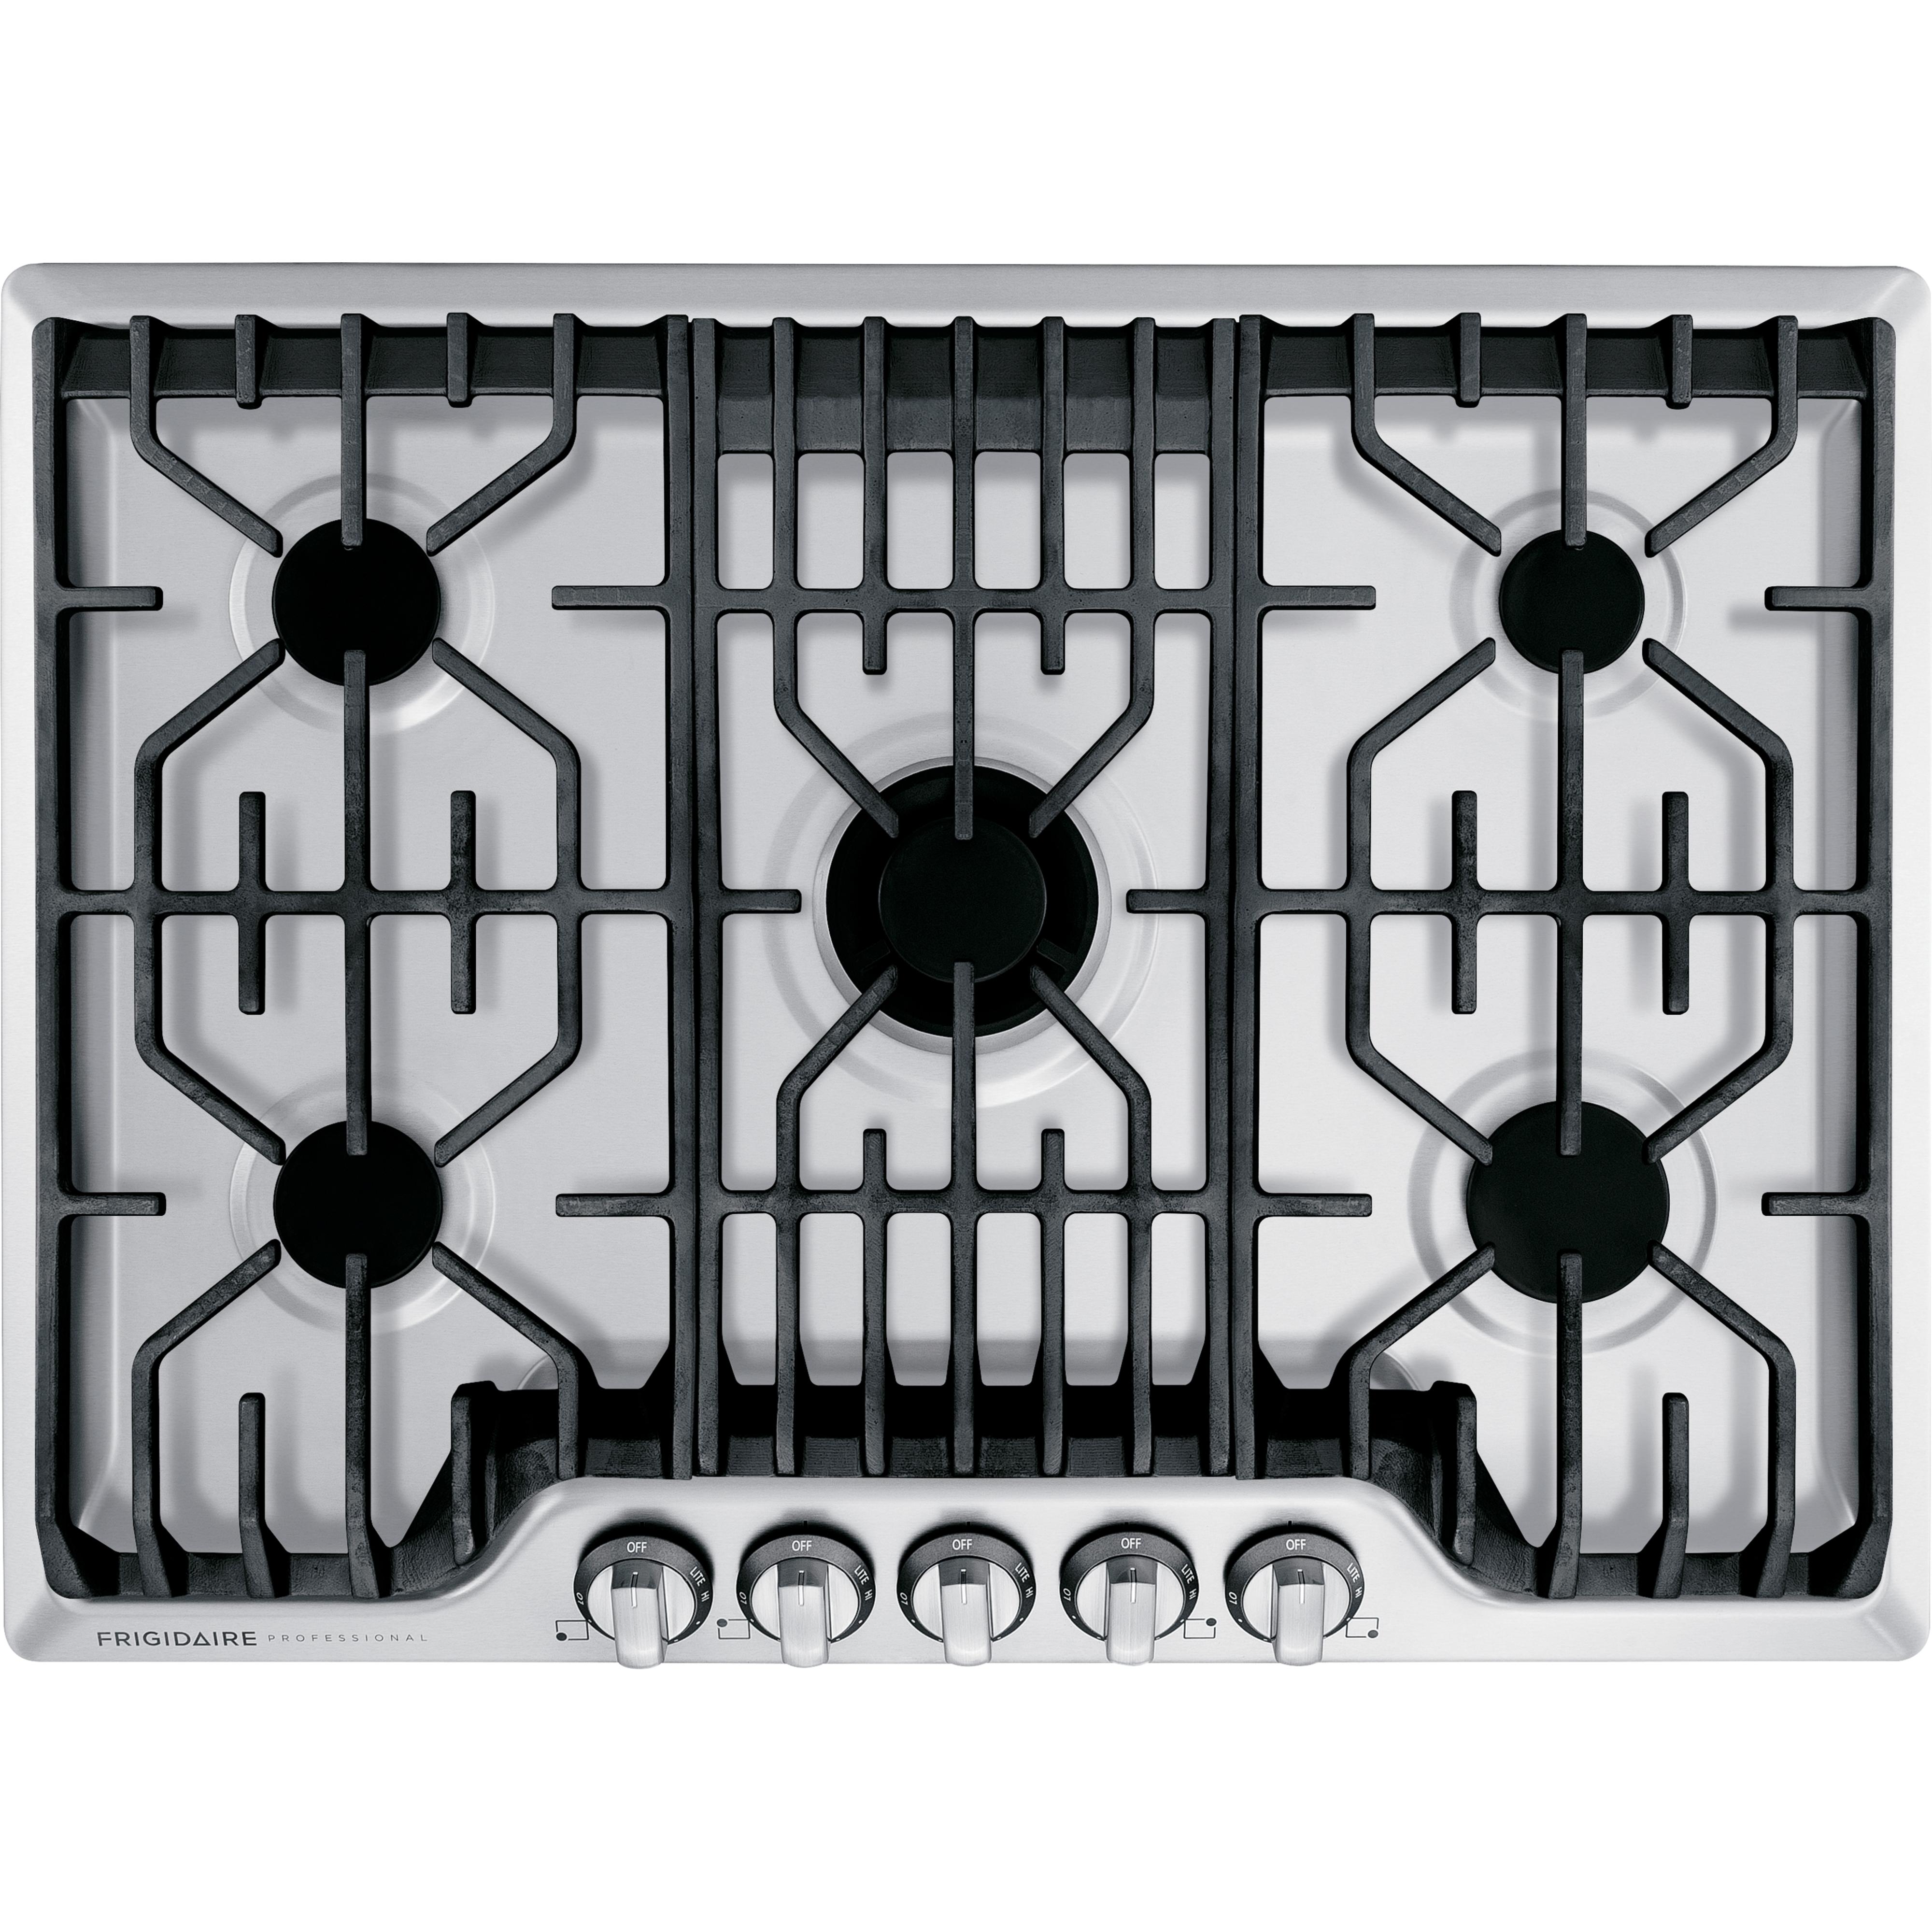 Frigidaire Professional 30-inch Built-In Gas Cooktop FPGC3077RS